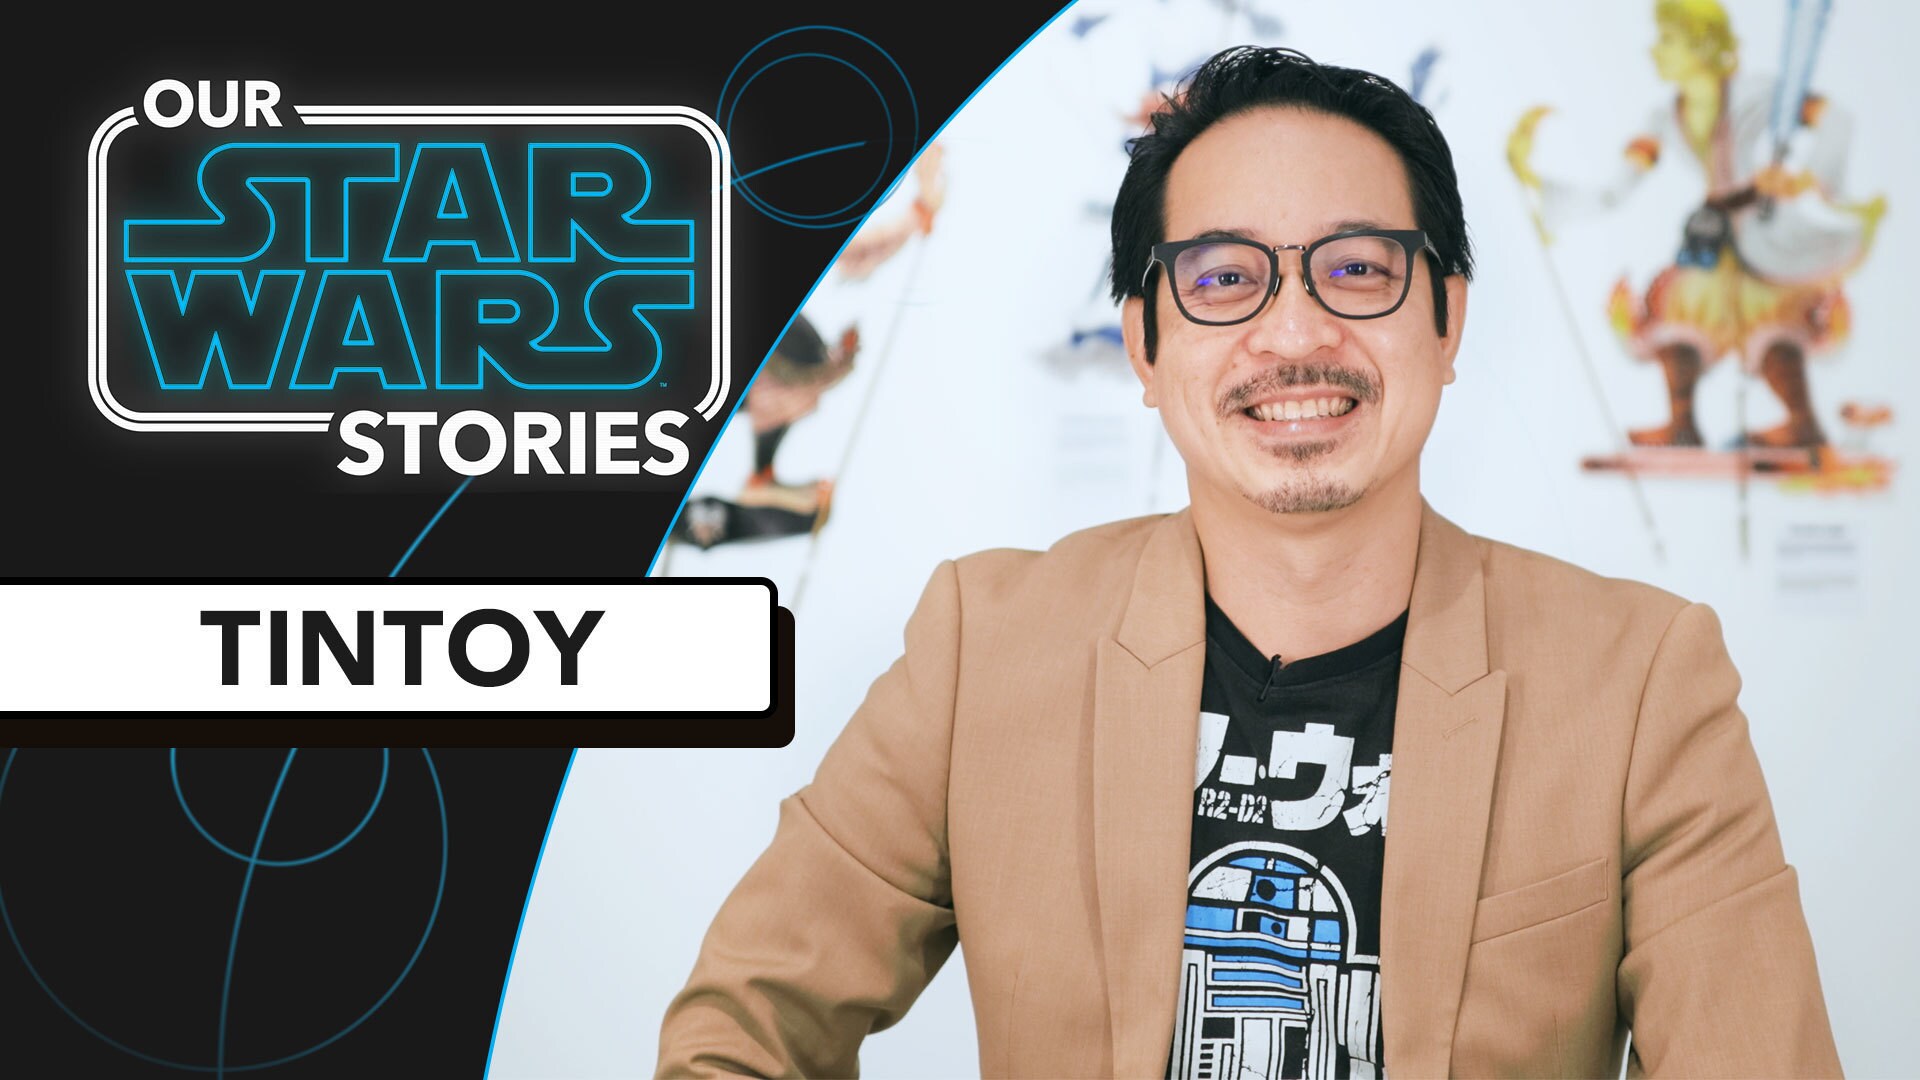 Tintoy Chuo's Fight to Save an Ancient Art with Star Wars | Our Star Wars Stories